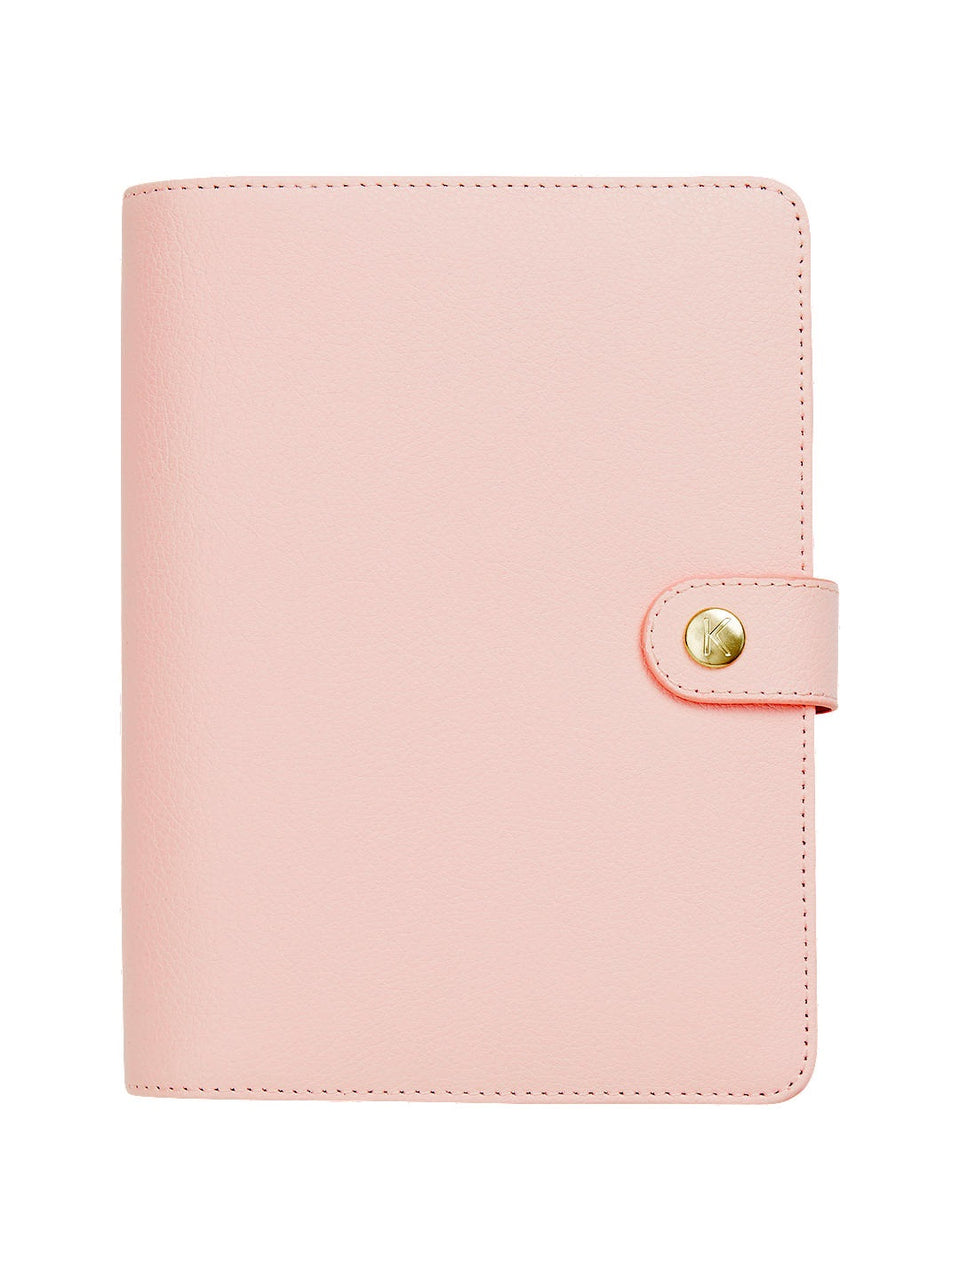 Leather Personal Planner - Pink, Medium